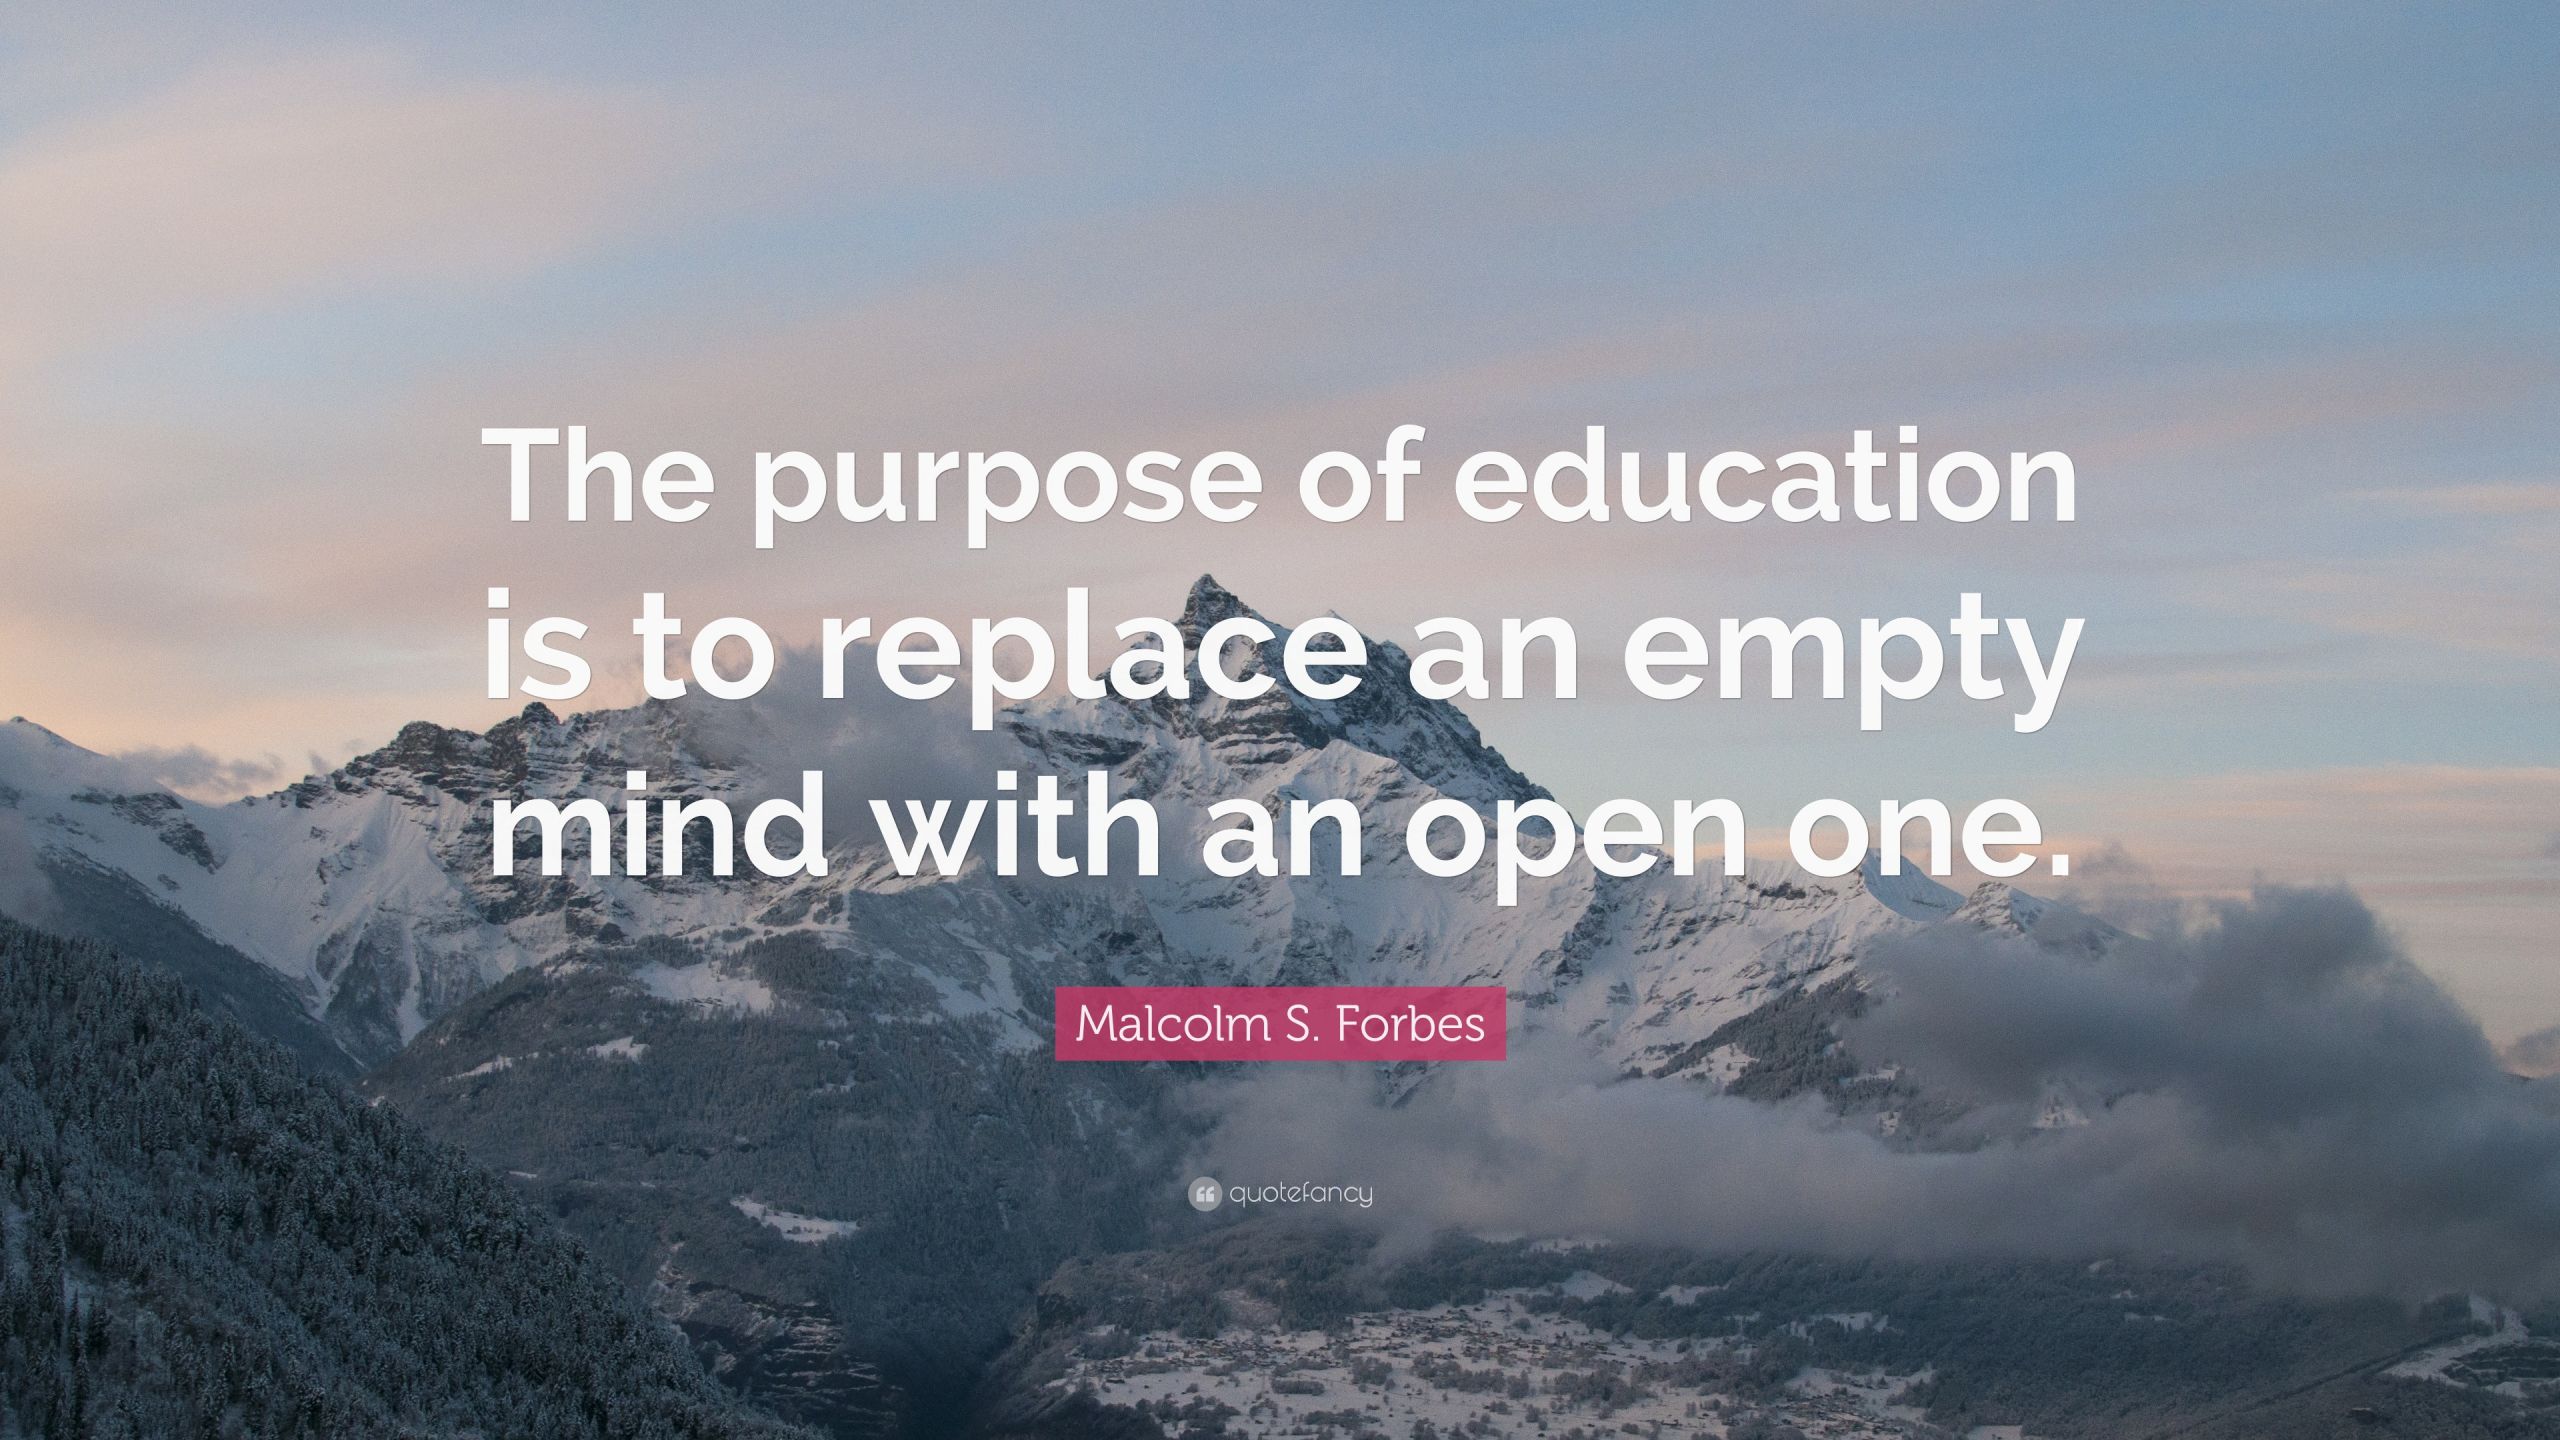 Purpose Of Education Quotes
 Education Quotes Askideas